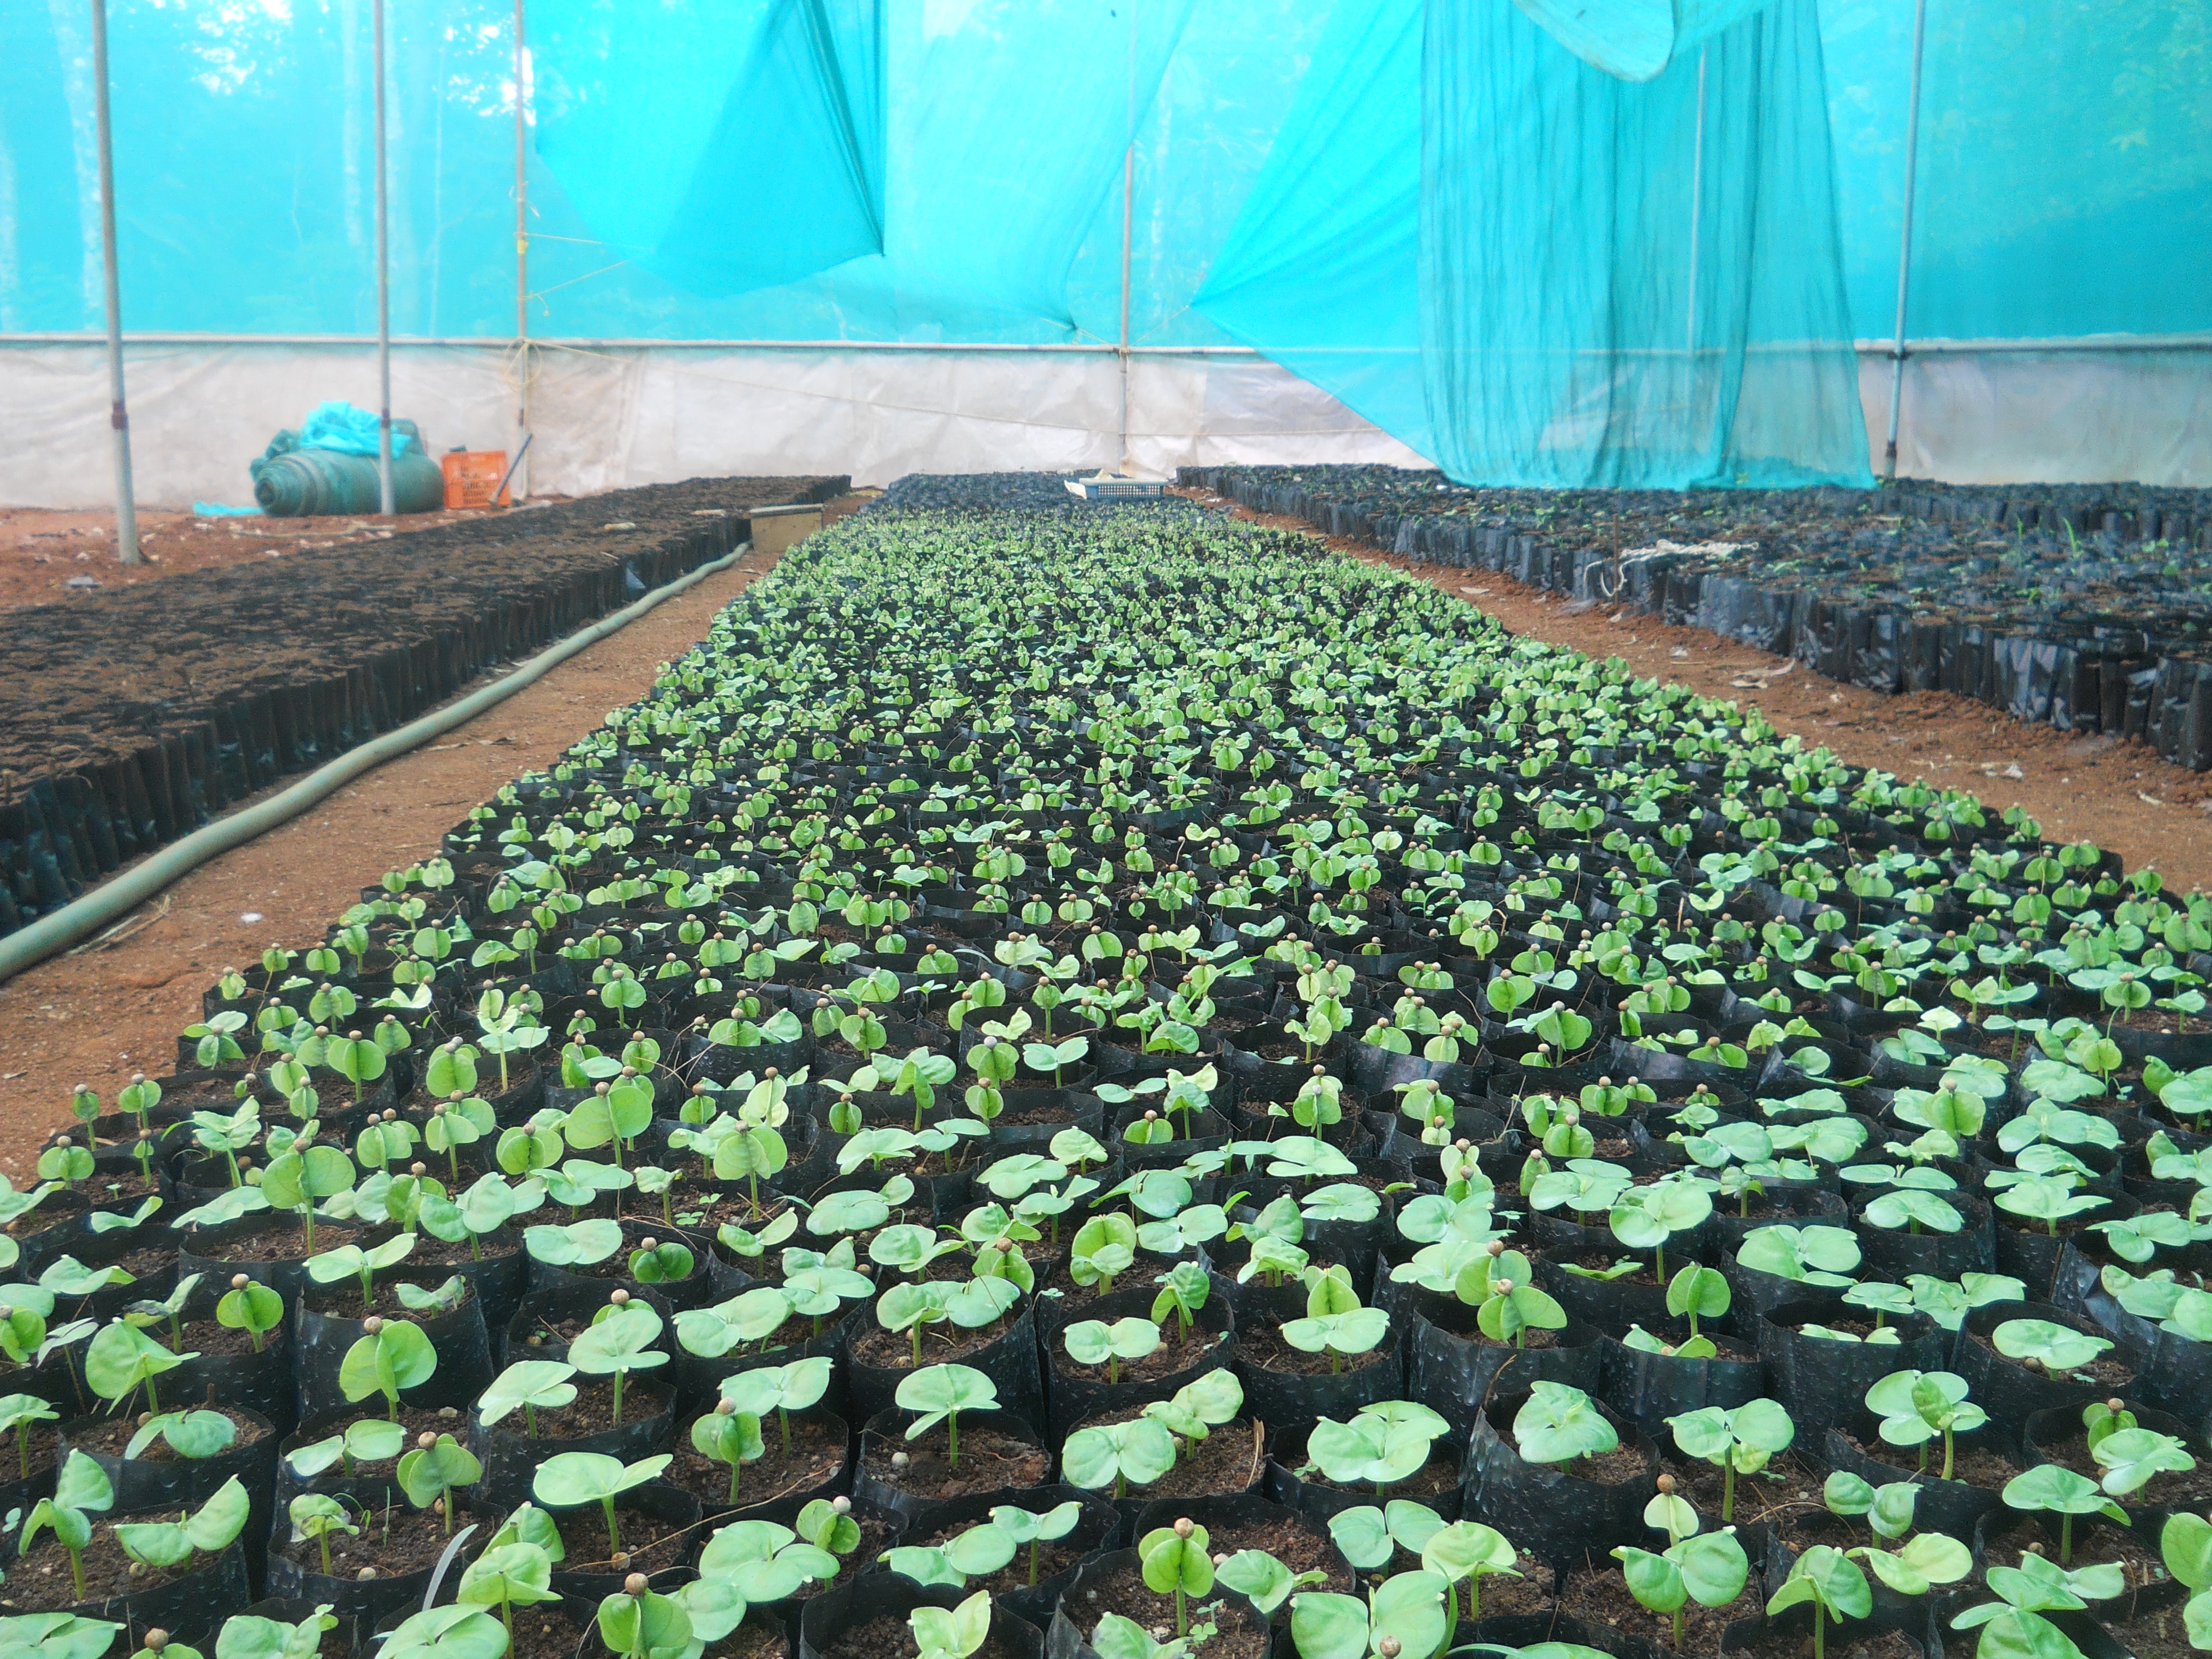 Quality planting material production in black pepper through seed germination